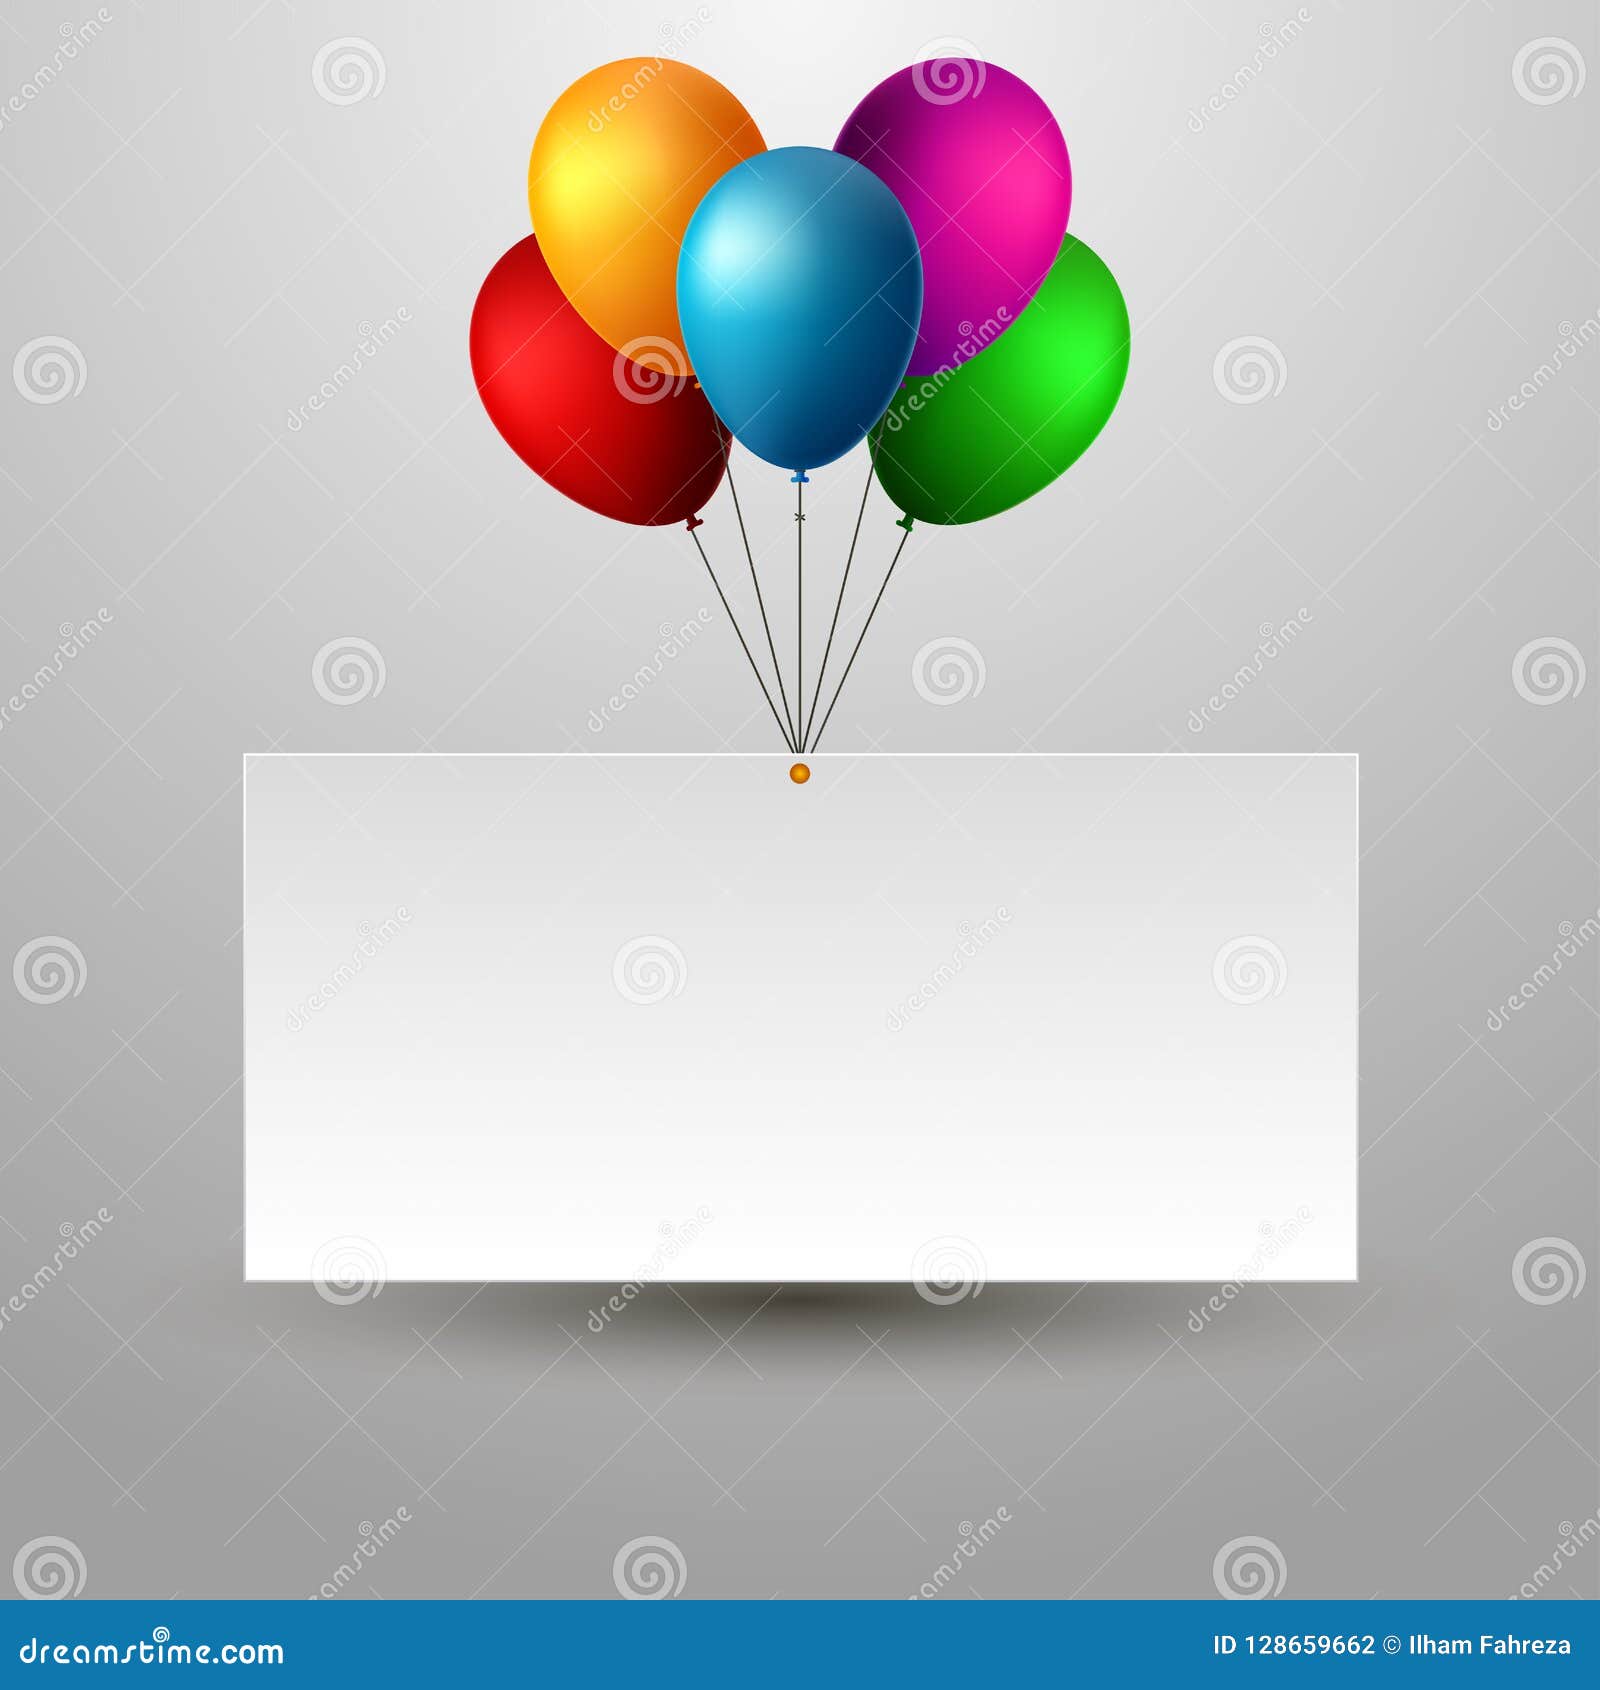 Blank Holiday Birthday Banner With Balloons Stock Vector